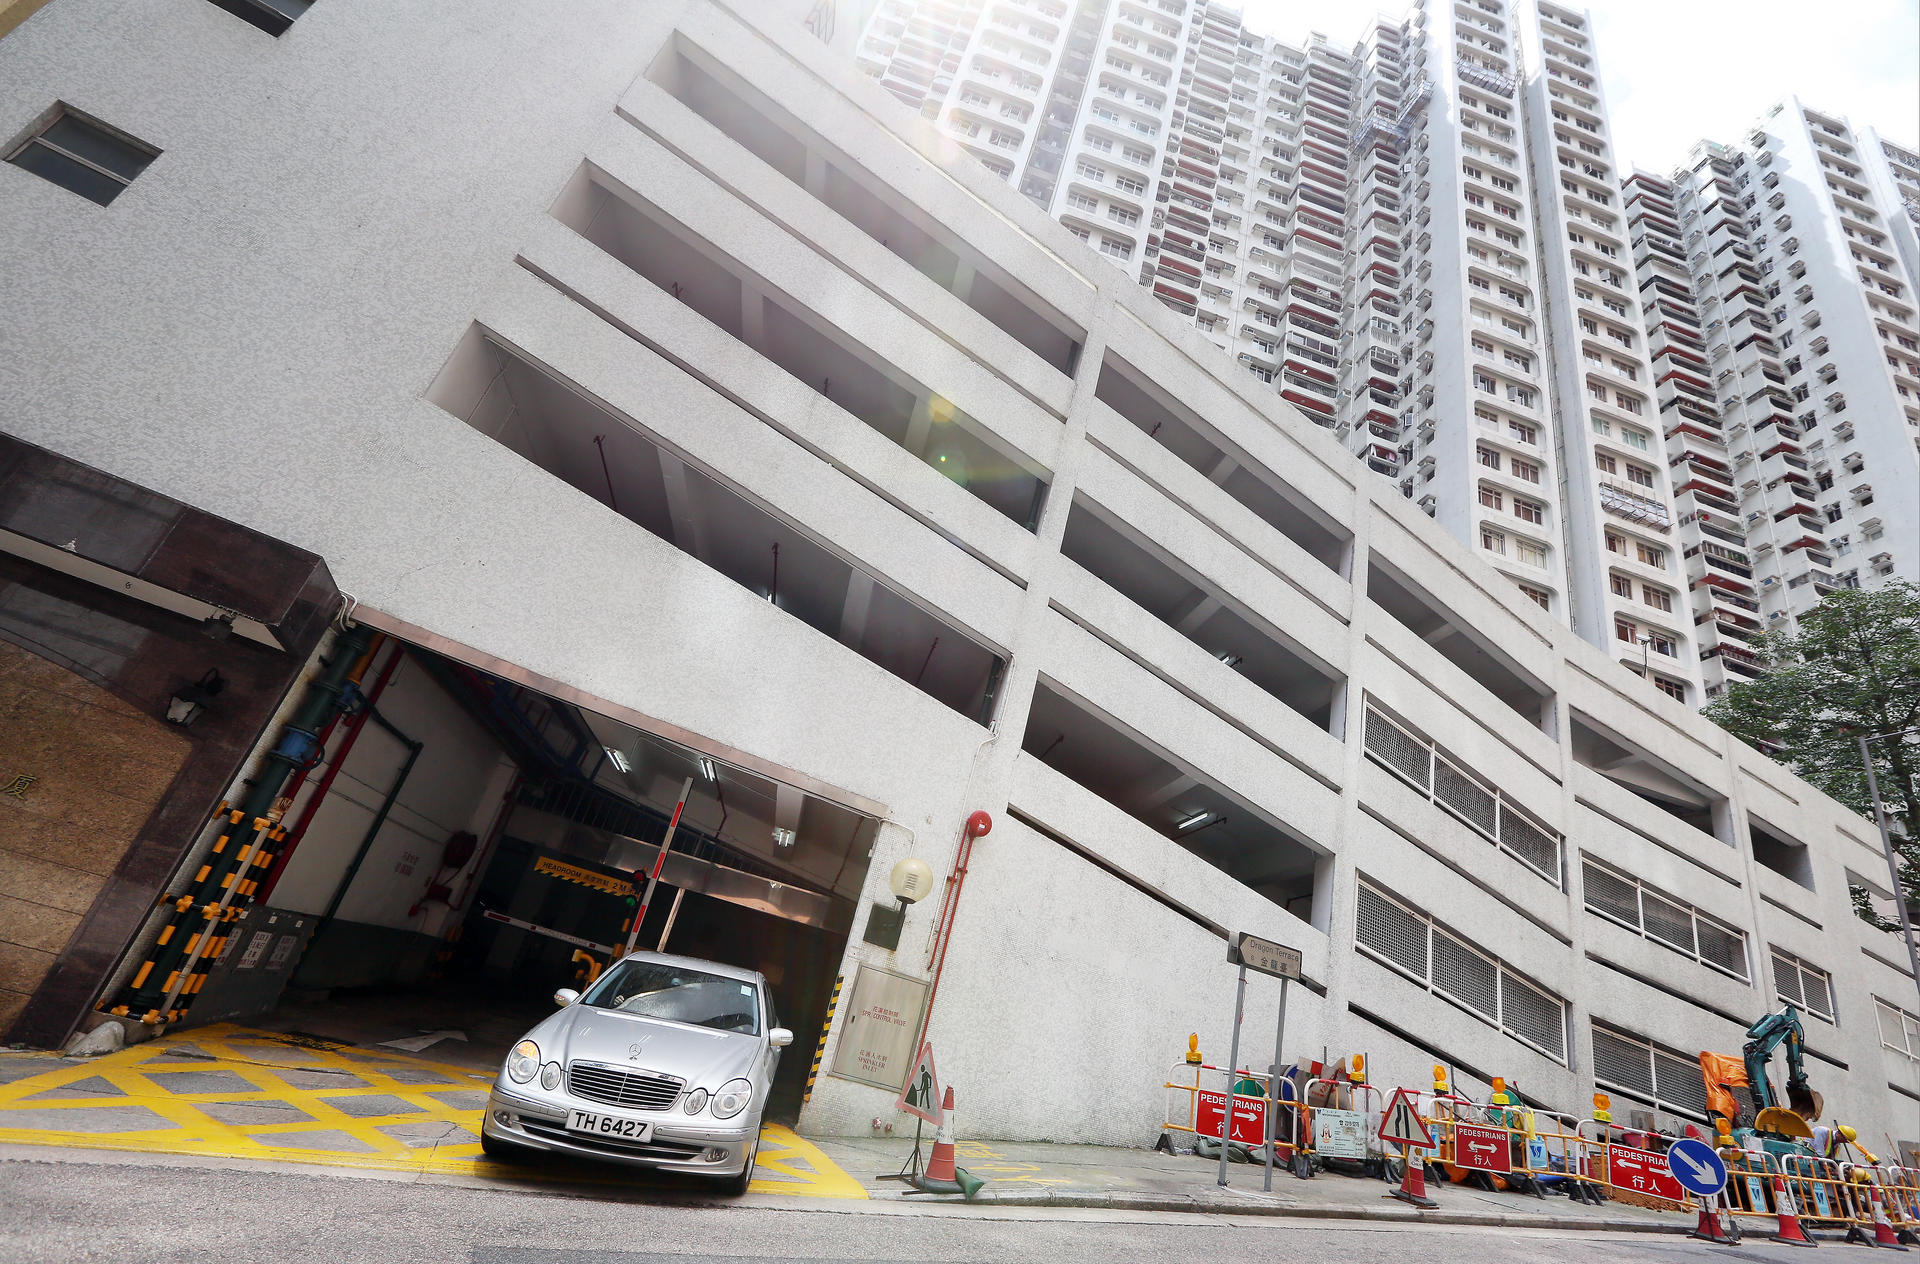 The average price for a Hong Kong Island parking space is HK$1.41 million. Photo: Nora Tam